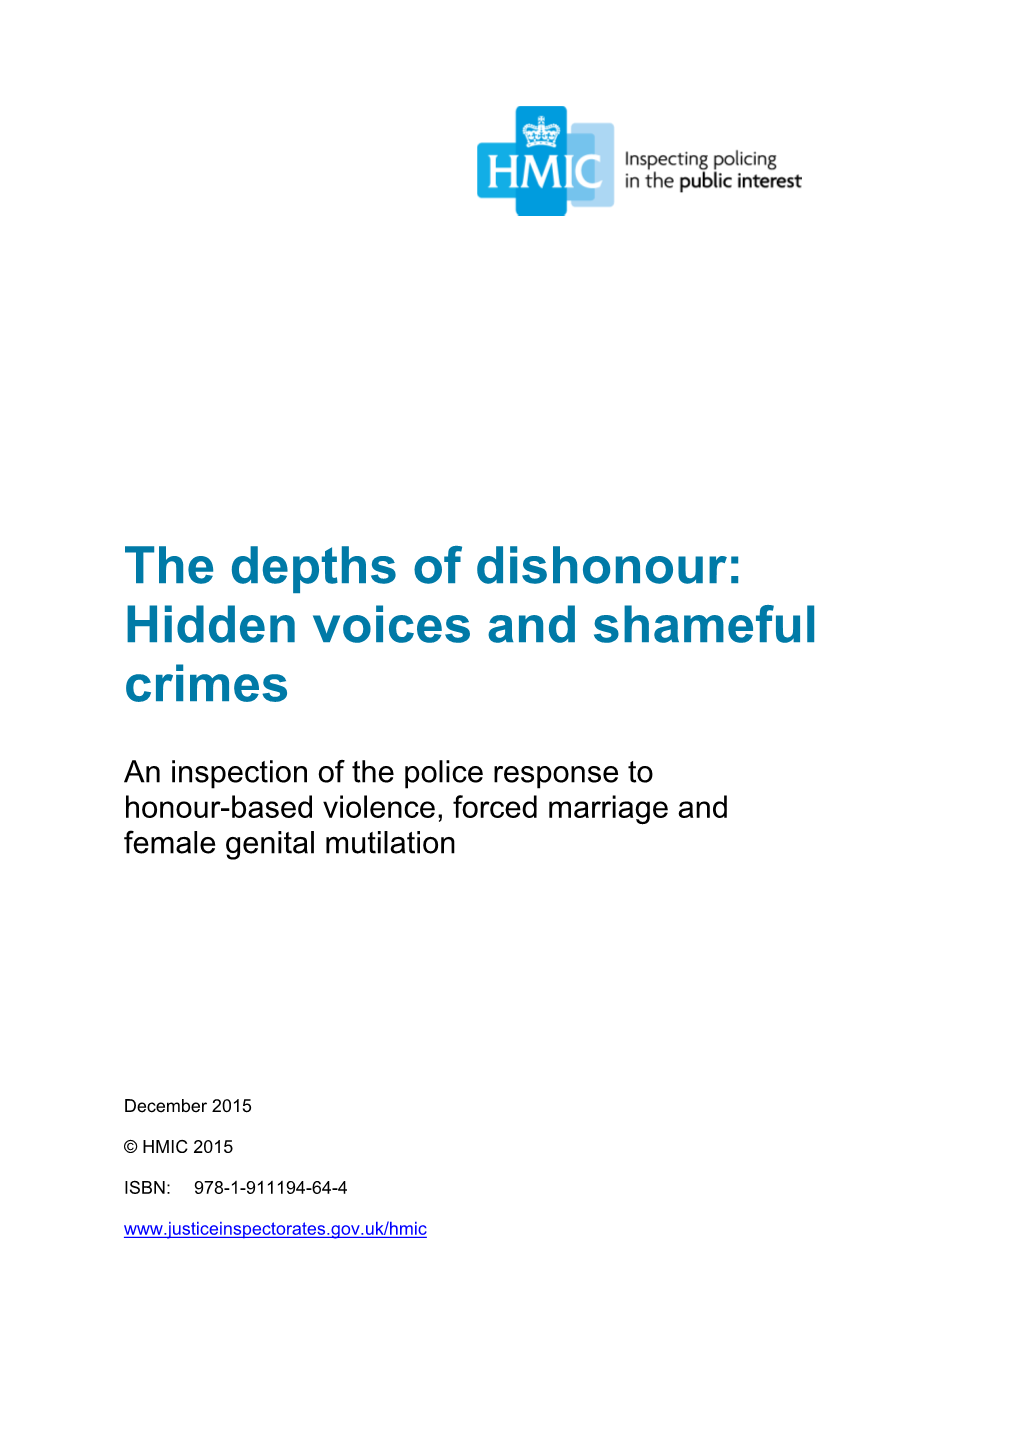 The Depths of Dishonour: Hidden Voices and Shameful Crimes